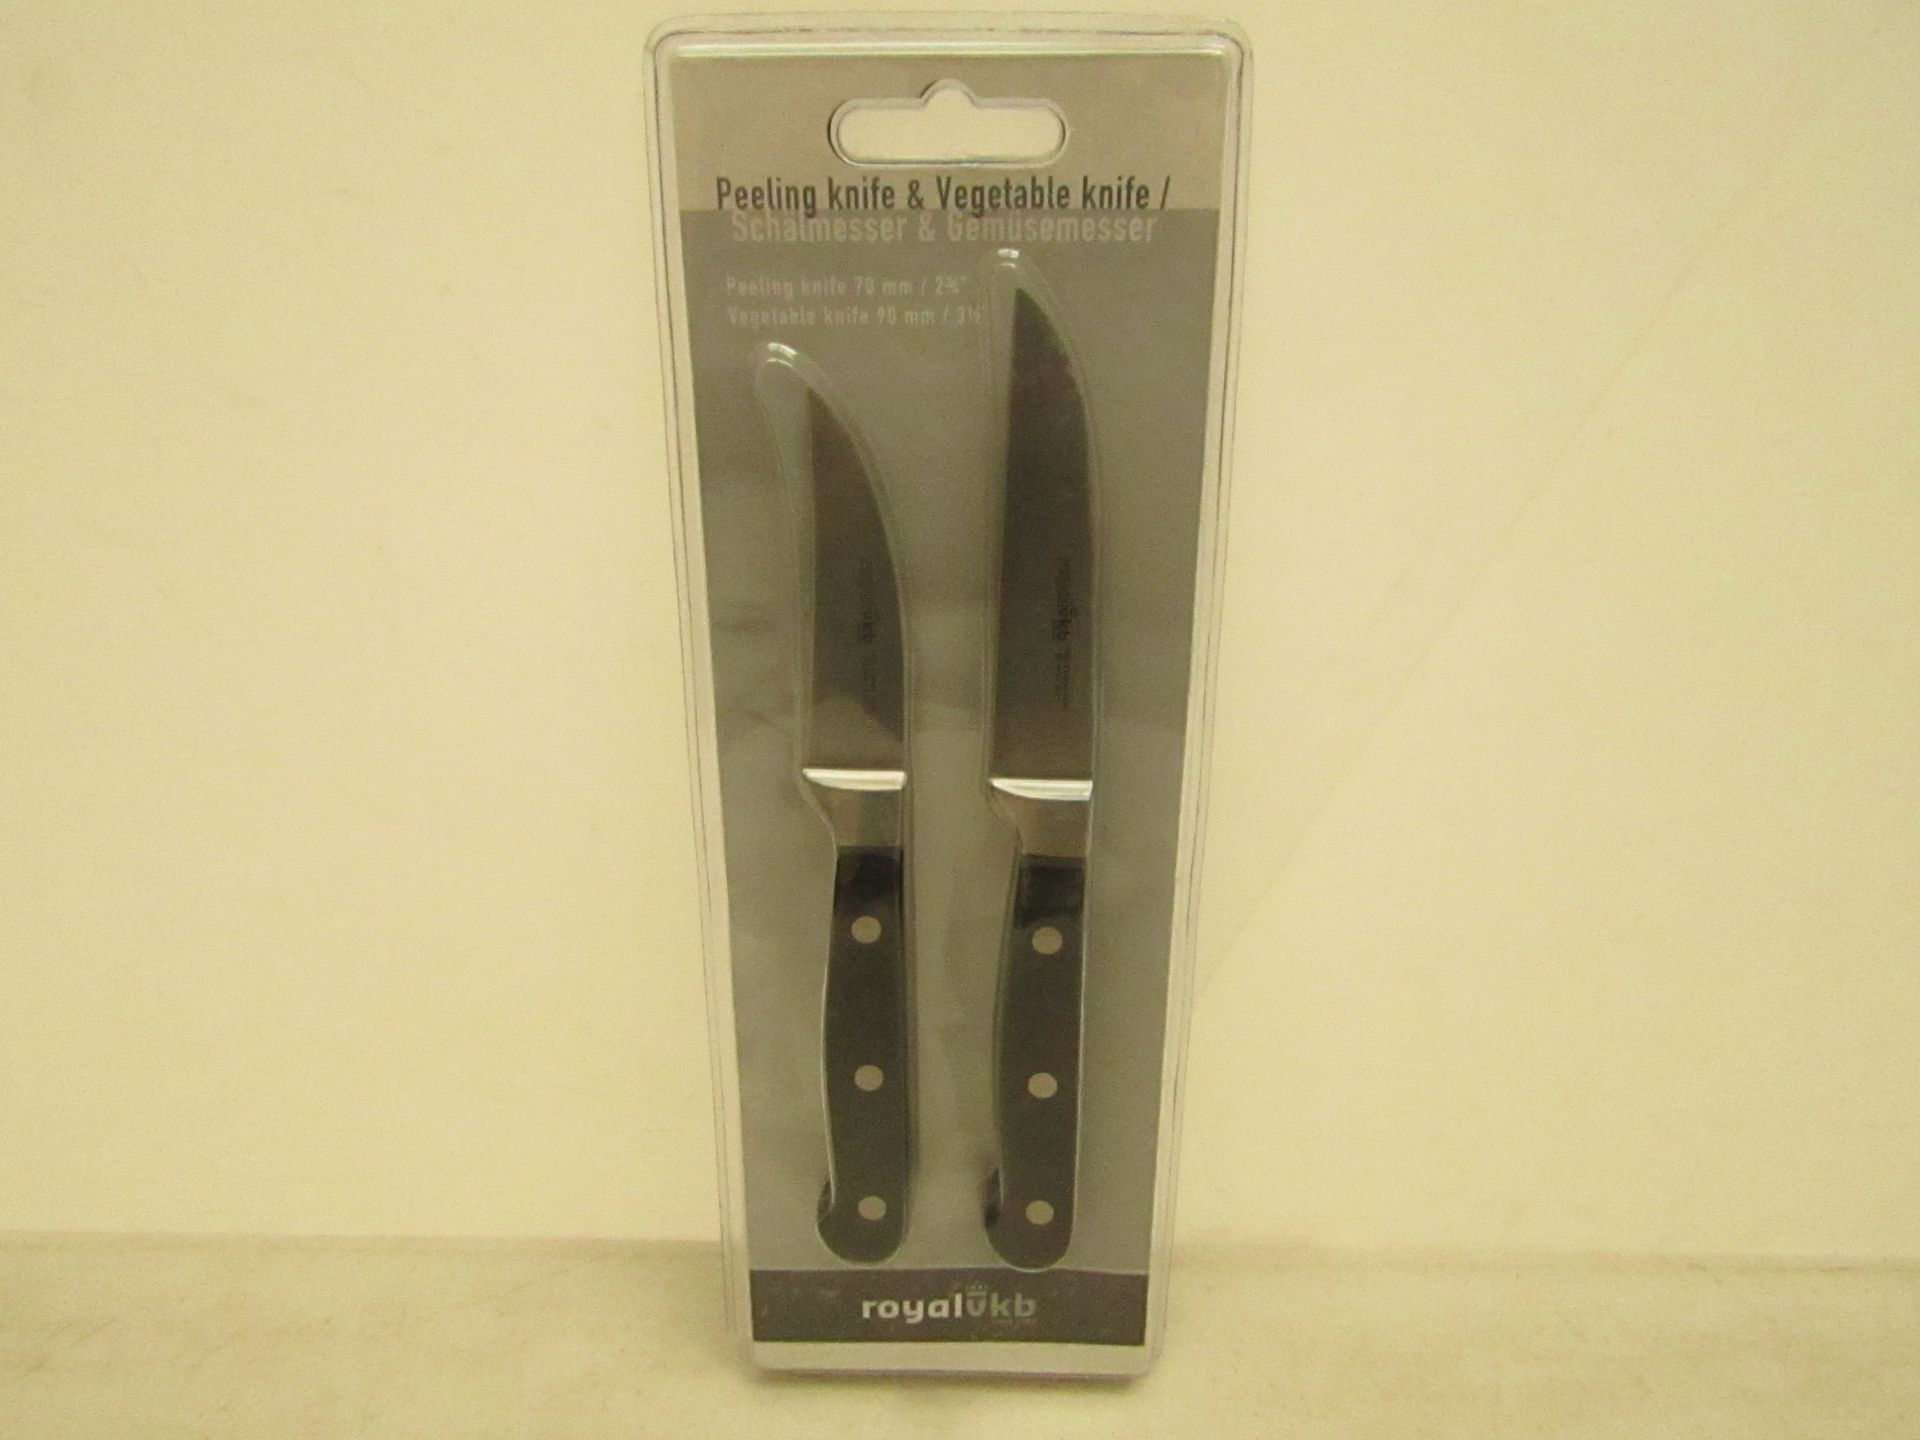 RoyalVKB peeling knife and vegetable knife, new and packaged.